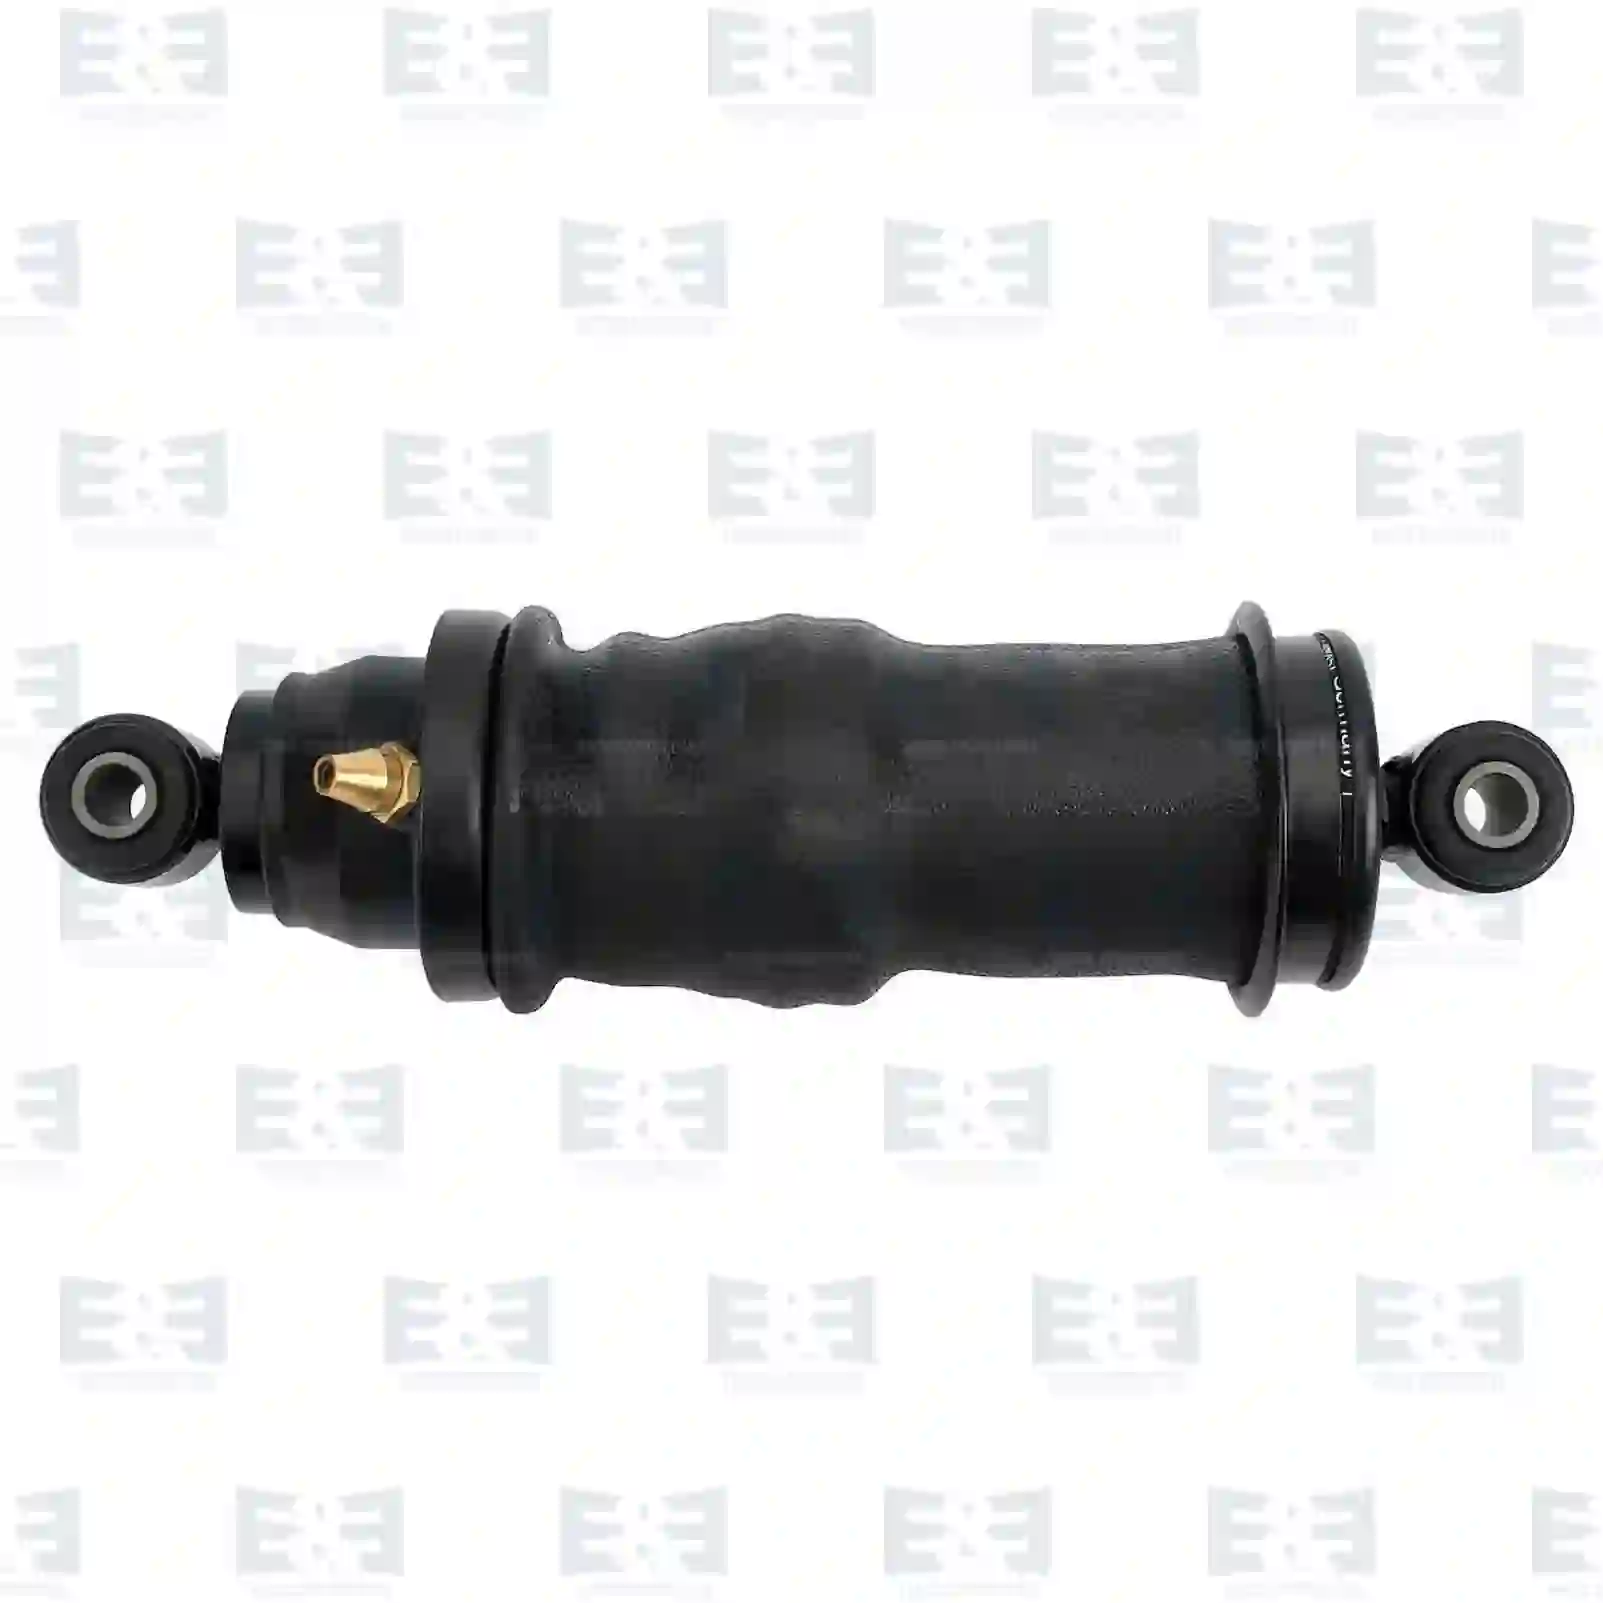 Cabin shock absorber, with air bellow, 2E2276249, 9428900219, 9428906019, 9438903919 ||  2E2276249 E&E Truck Spare Parts | Truck Spare Parts, Auotomotive Spare Parts Cabin shock absorber, with air bellow, 2E2276249, 9428900219, 9428906019, 9438903919 ||  2E2276249 E&E Truck Spare Parts | Truck Spare Parts, Auotomotive Spare Parts